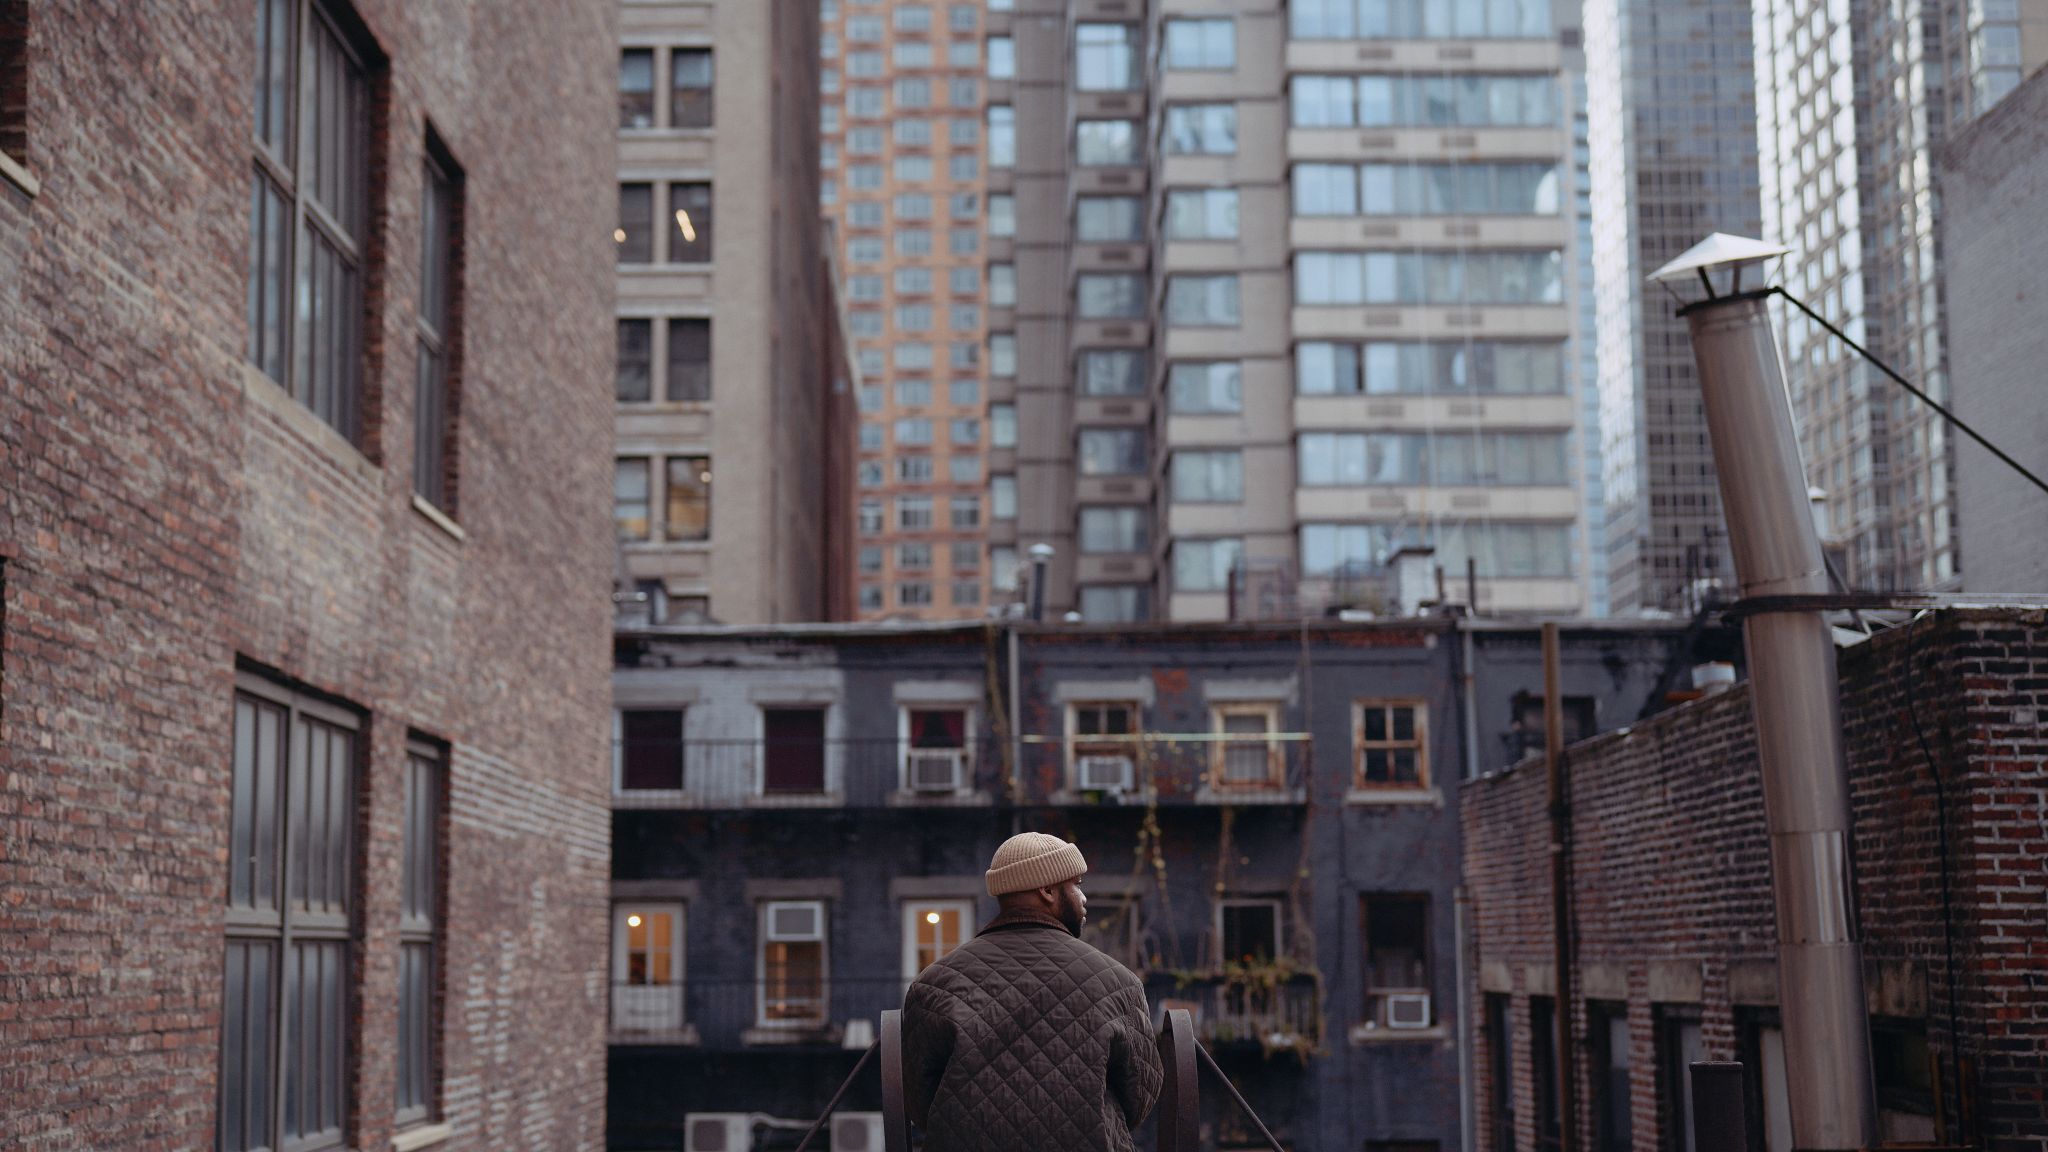 C&I Films From New York, I Love You Still of view from behind of man wearing a beige knit cap looking out over the city